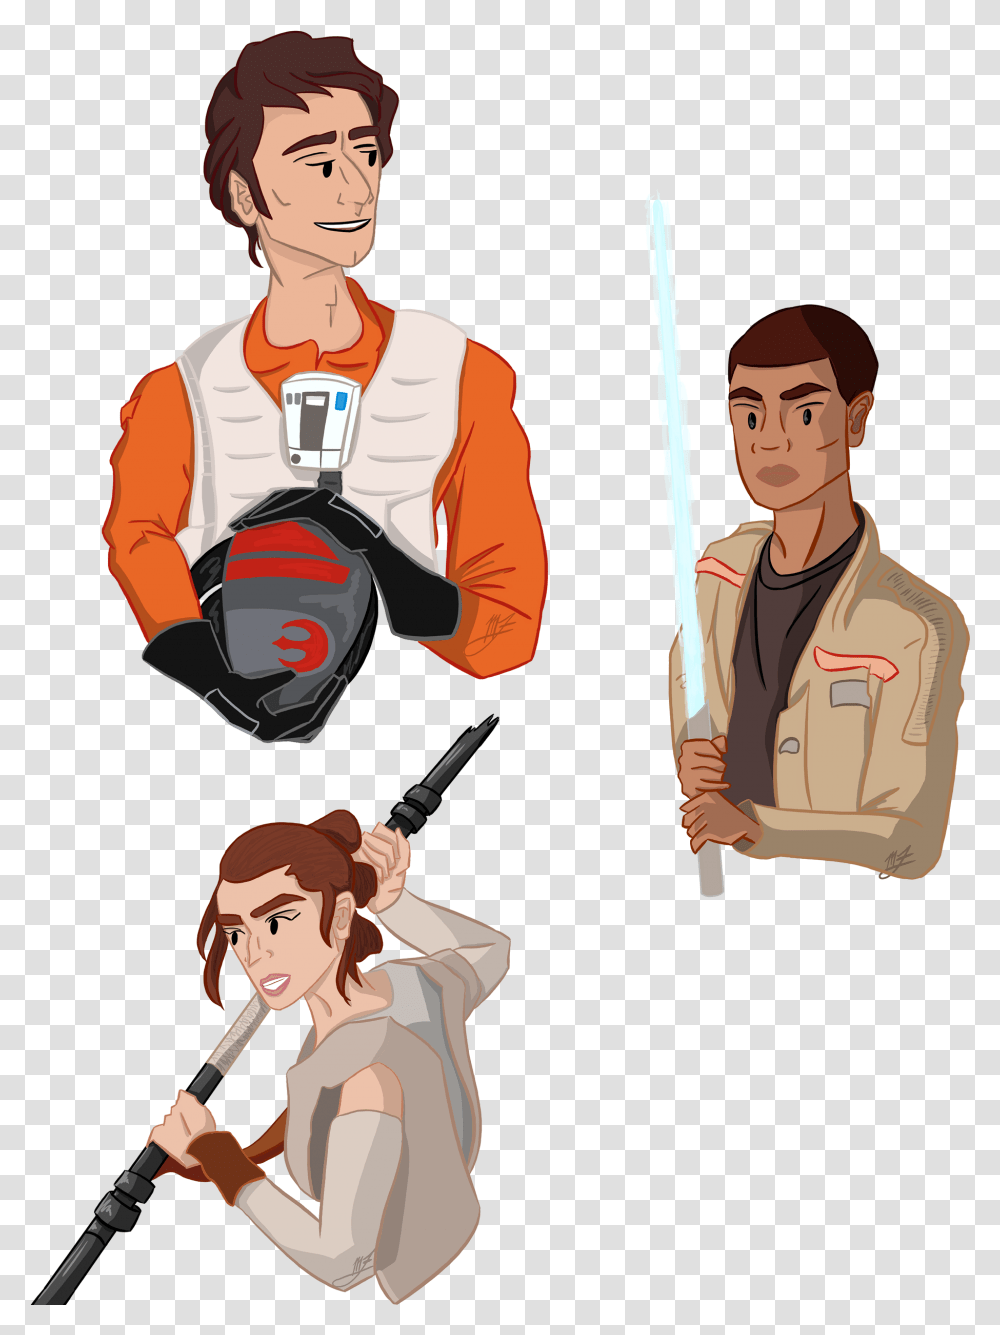 Busts Of Poe Finn And Rey From Star Wars Cartoon Clipart Animated Finn From Star Wars, Person, Book, Clothing, Comics Transparent Png